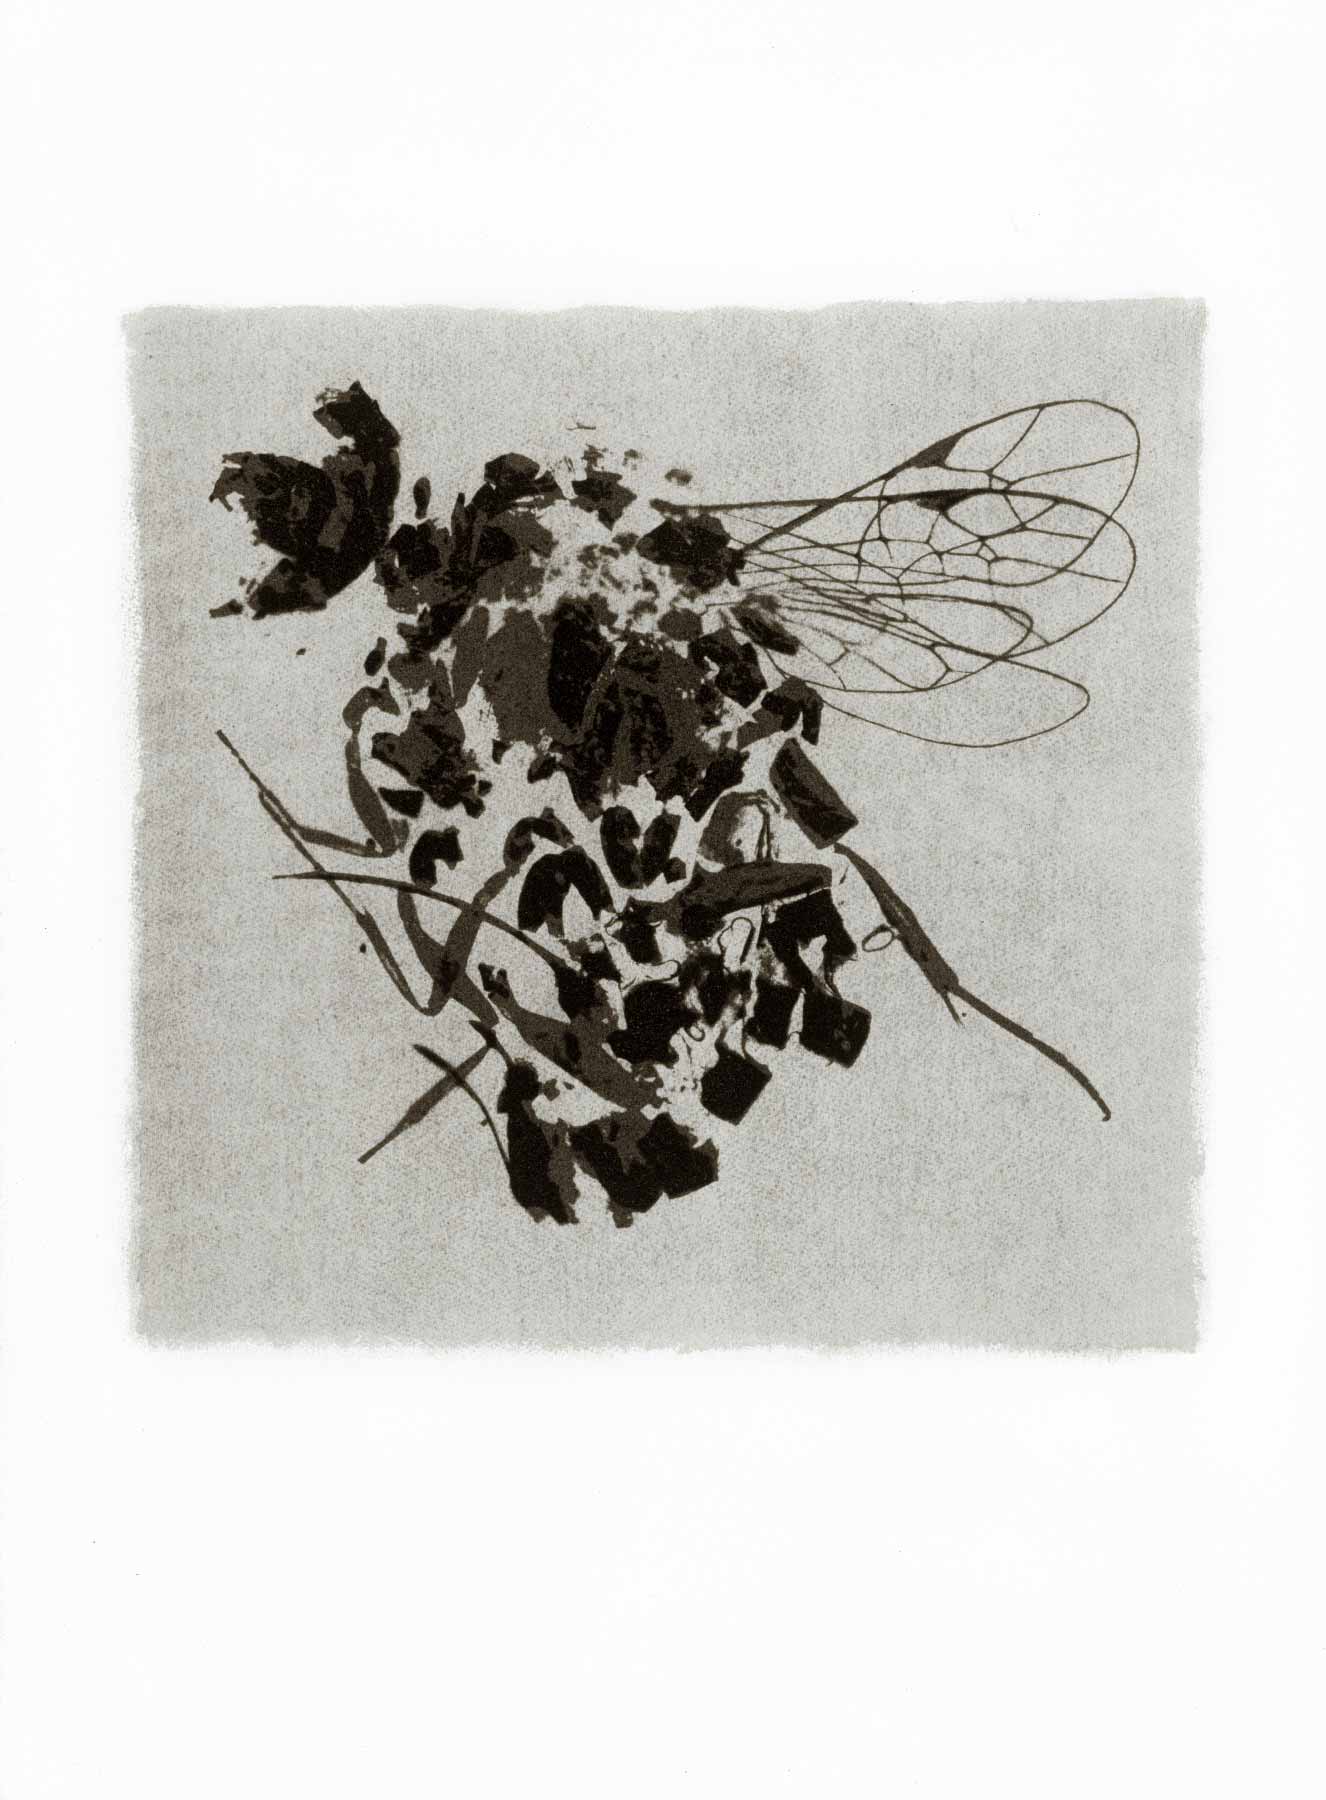 Gum bichromate insect - Wasp 1996